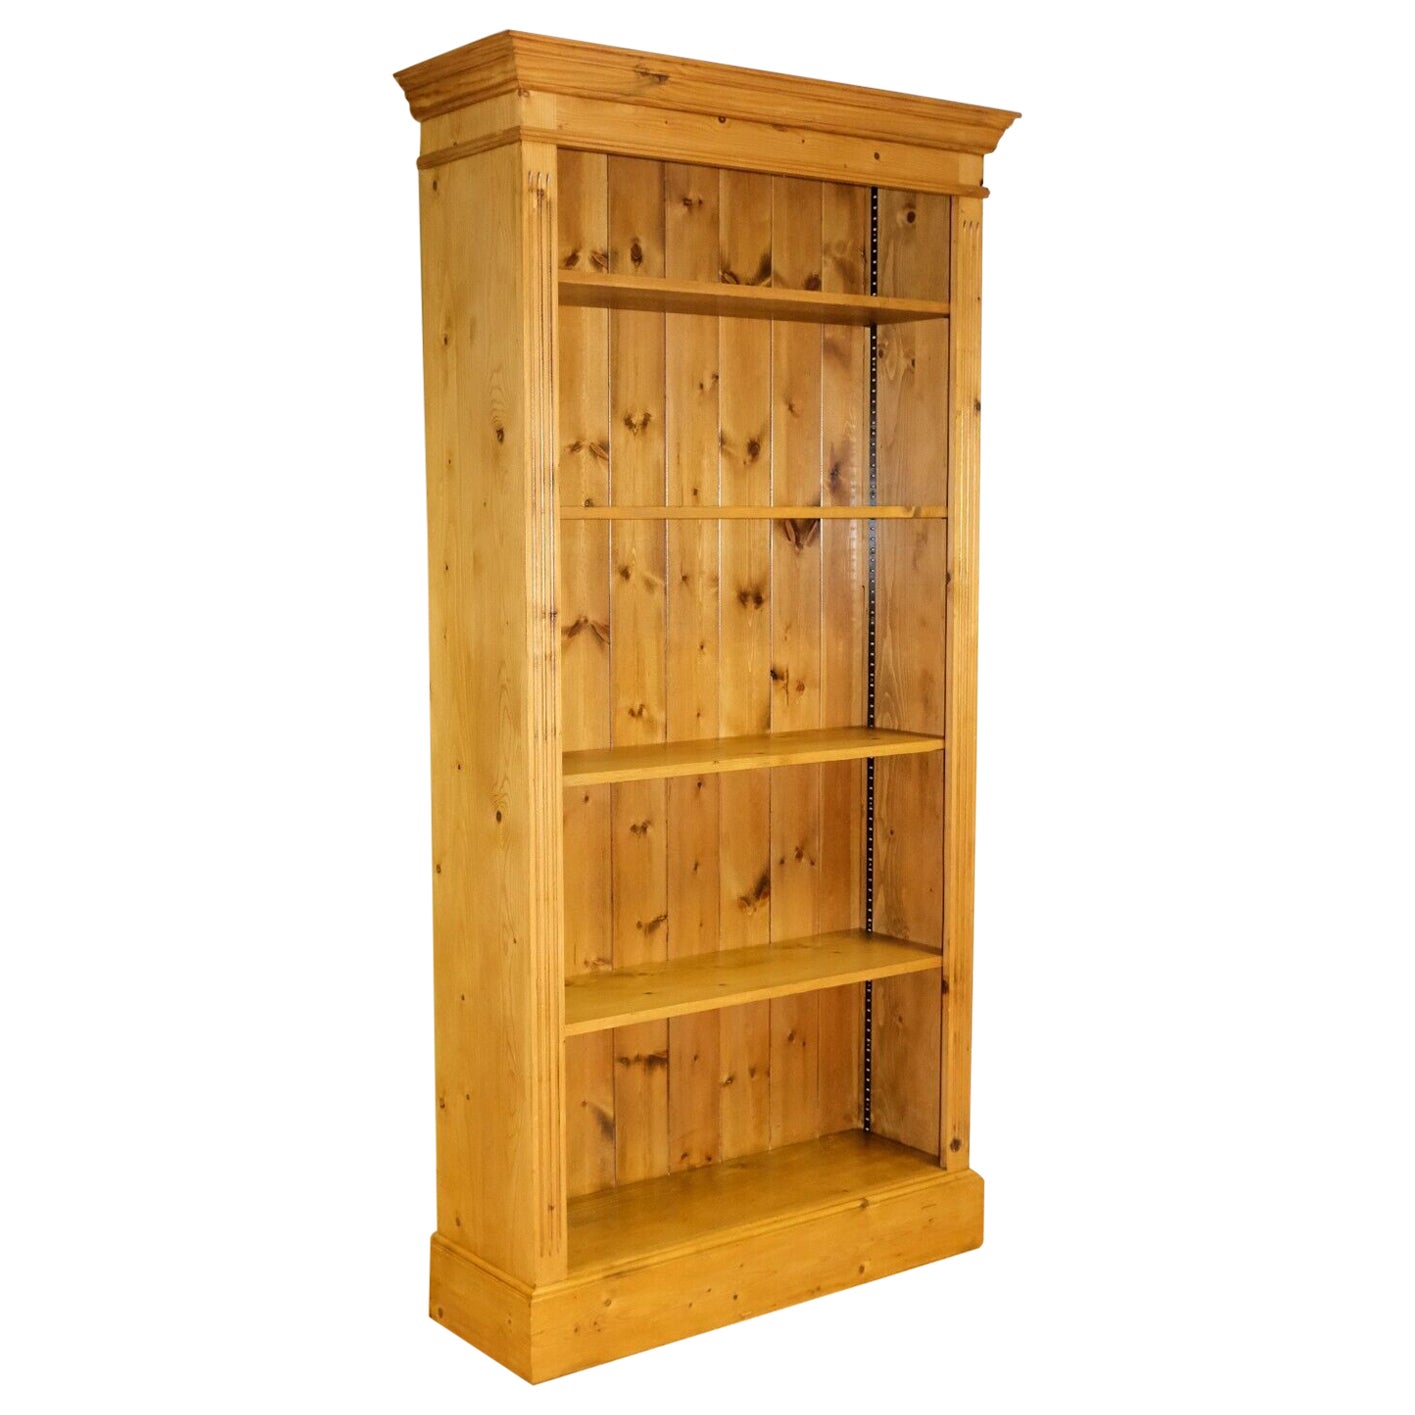 CLASSIC OPEN PINE BOOKCASE WiTH FOUR ADJUSTABLE SHELVES PLINTH BASE For Sale